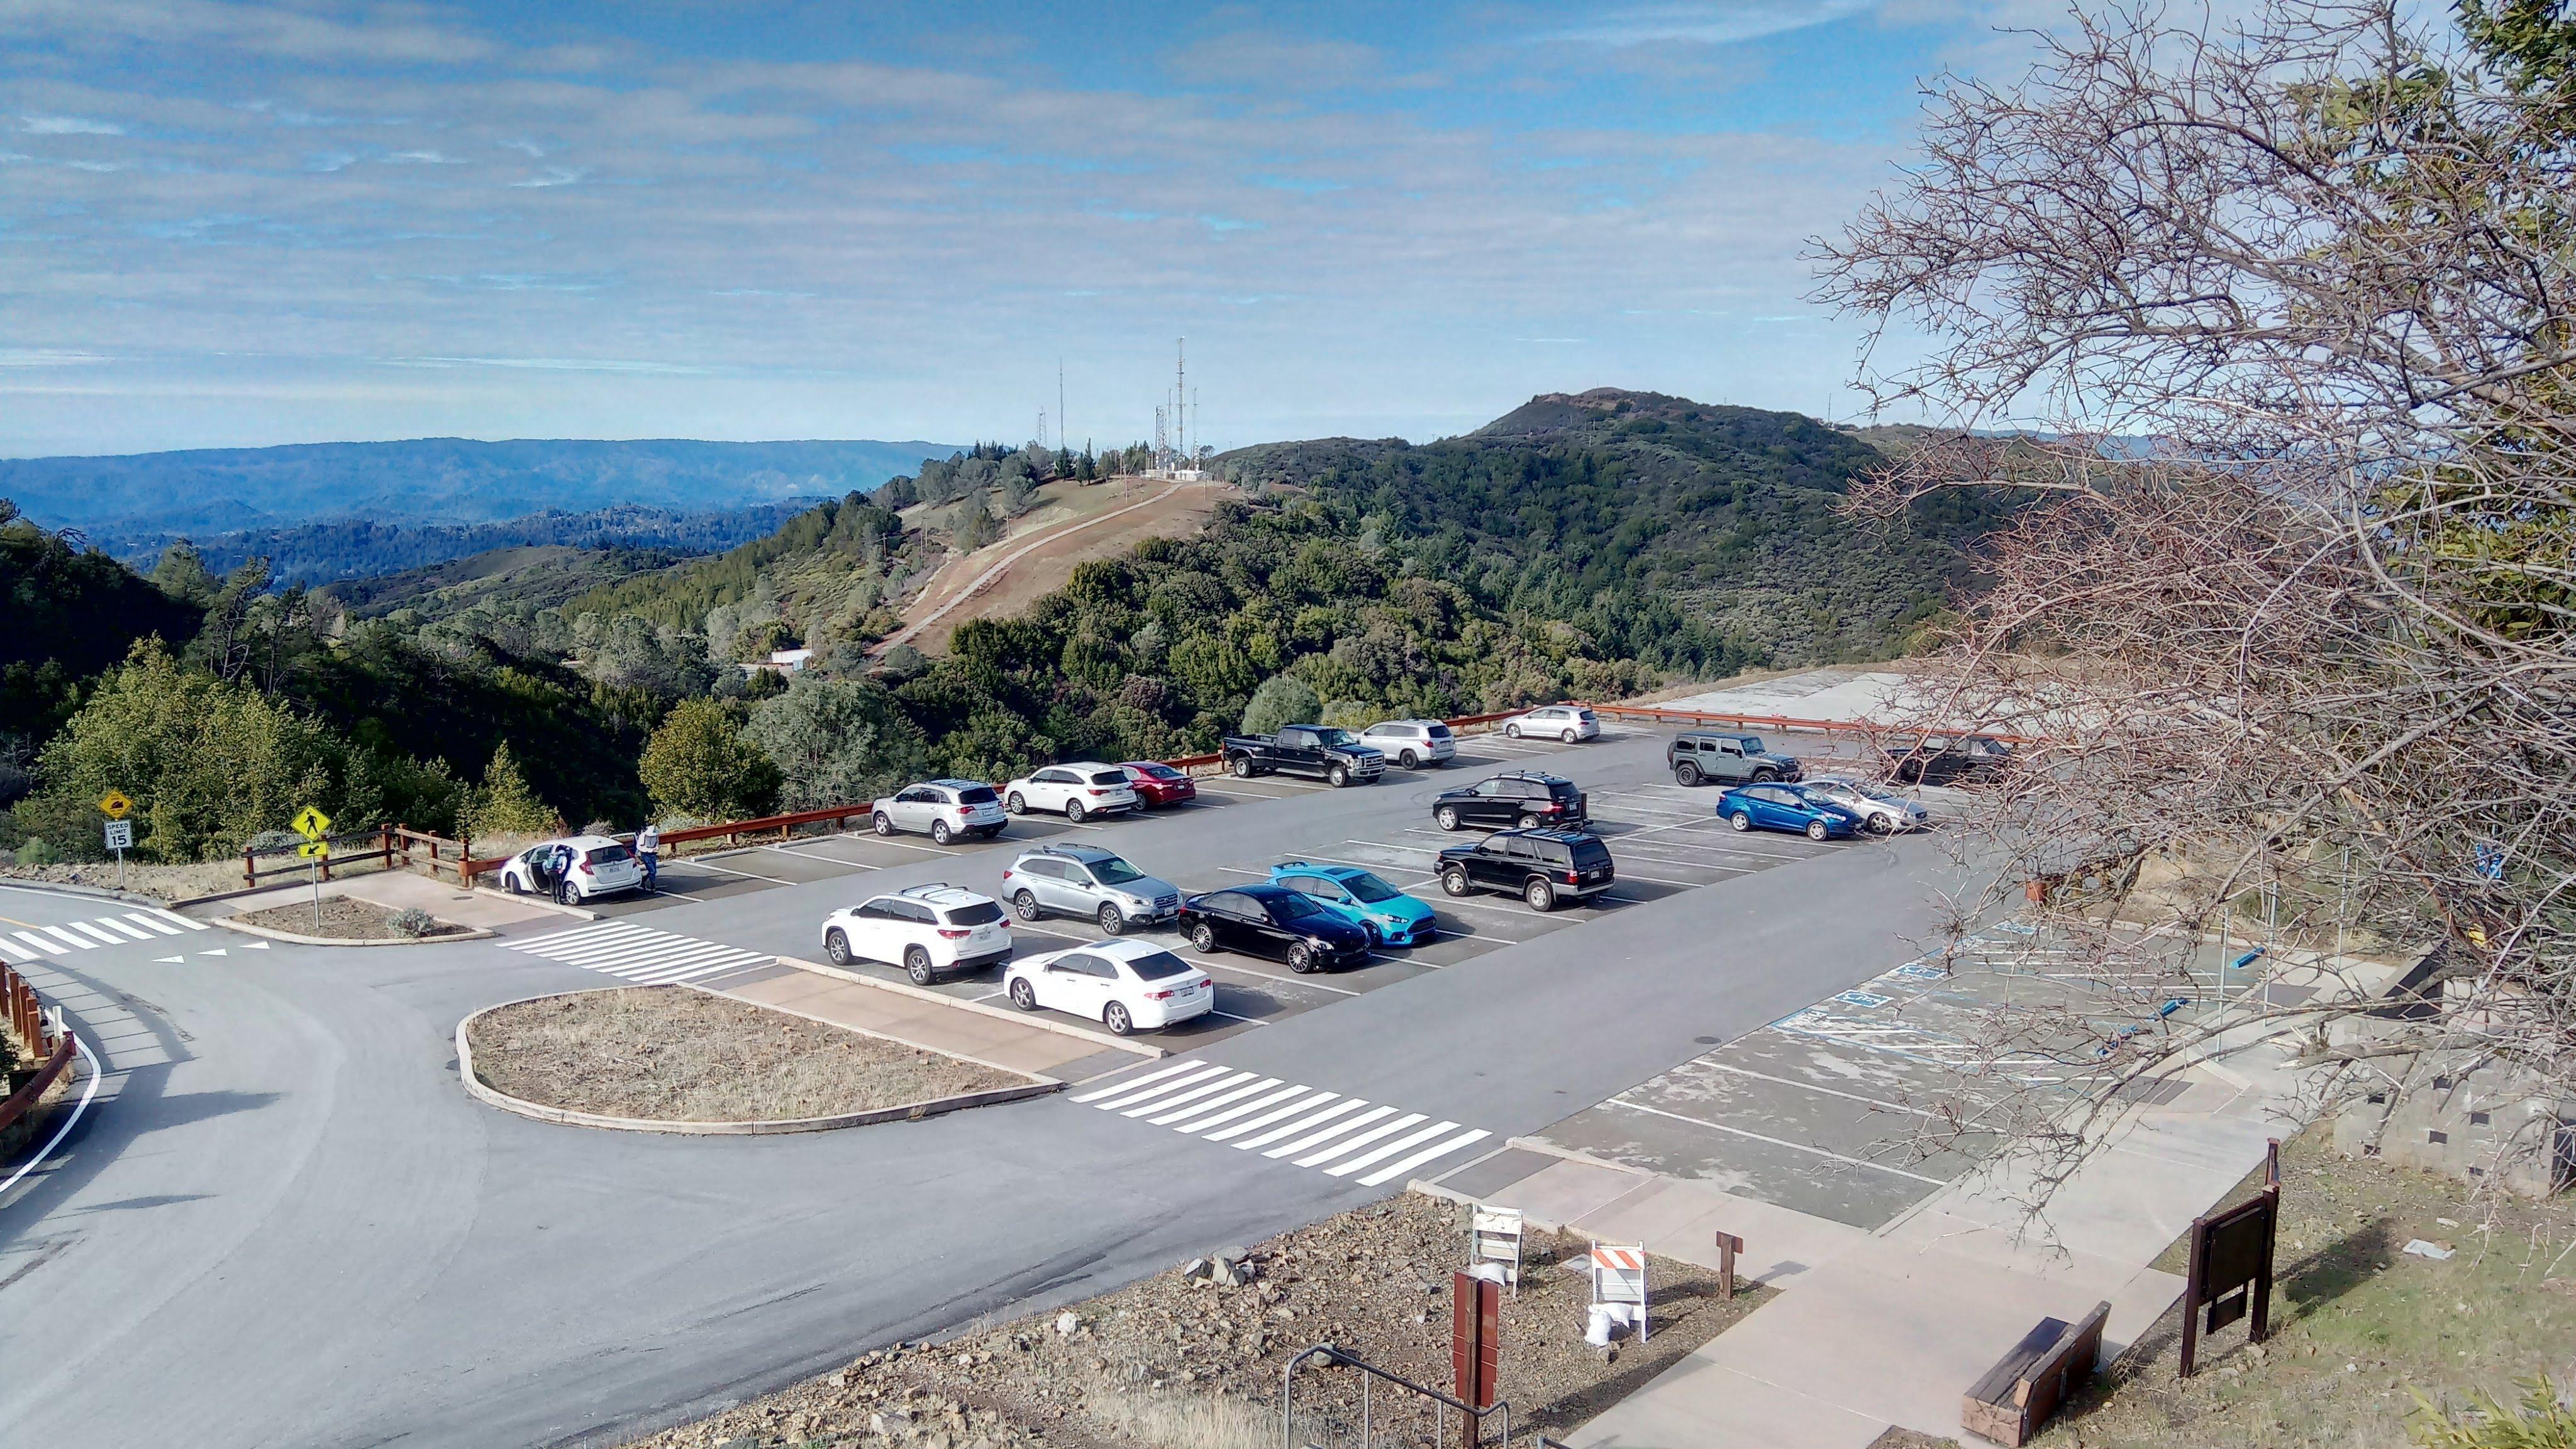 Parking and the antenna farm on the second peak